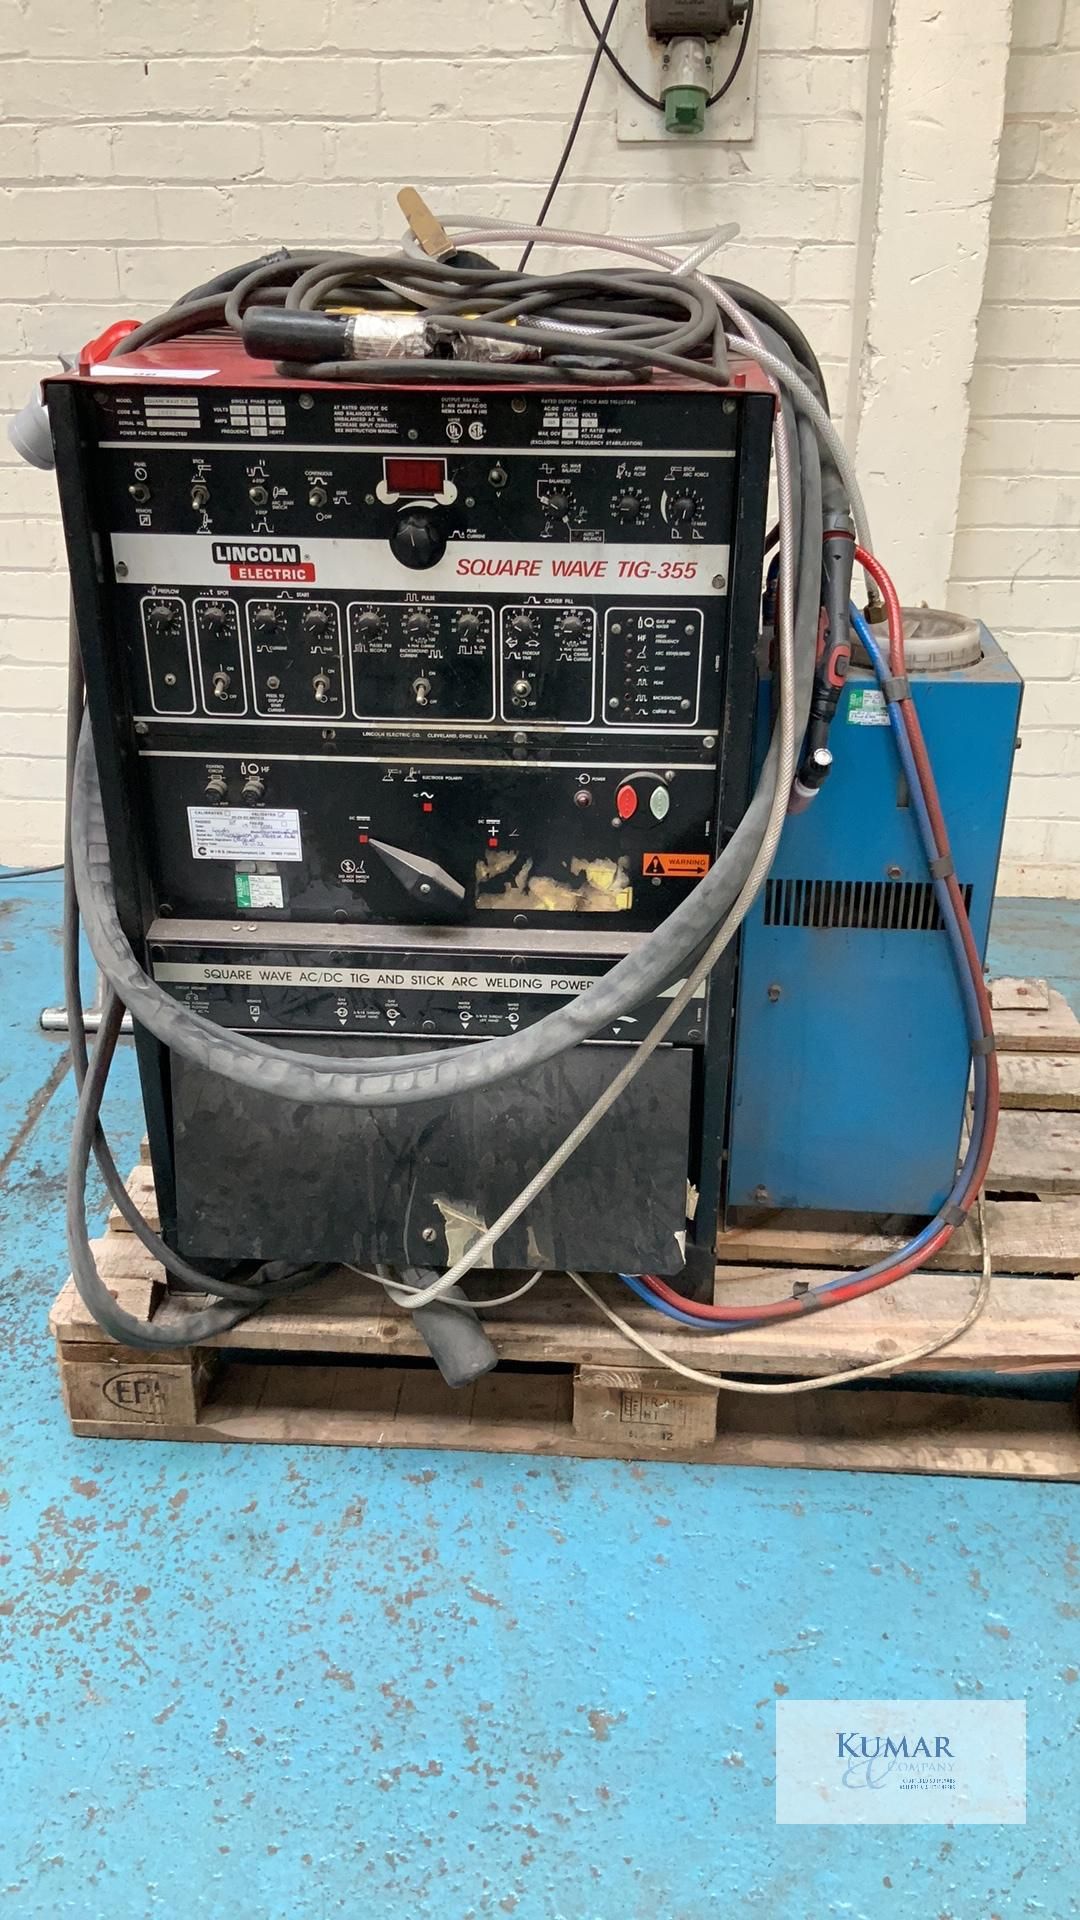 Lincoln Electric Tig 355 Square Wave AC/DC Tig & Stick Arc Welding Power Source, Serial No.